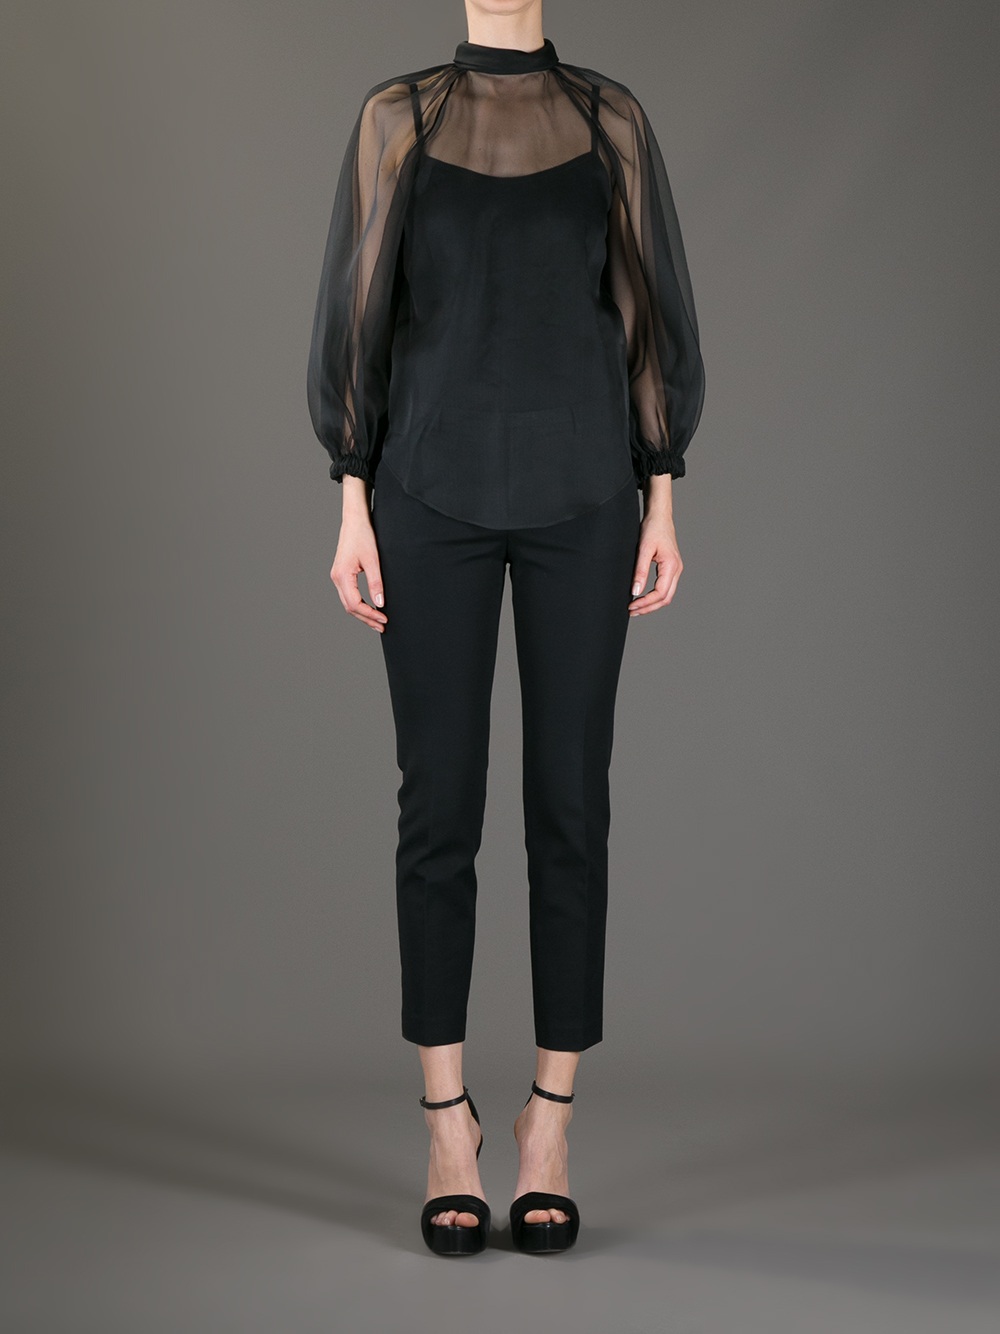 Givenchy Sheer Peasant Blouse in Black | Lyst